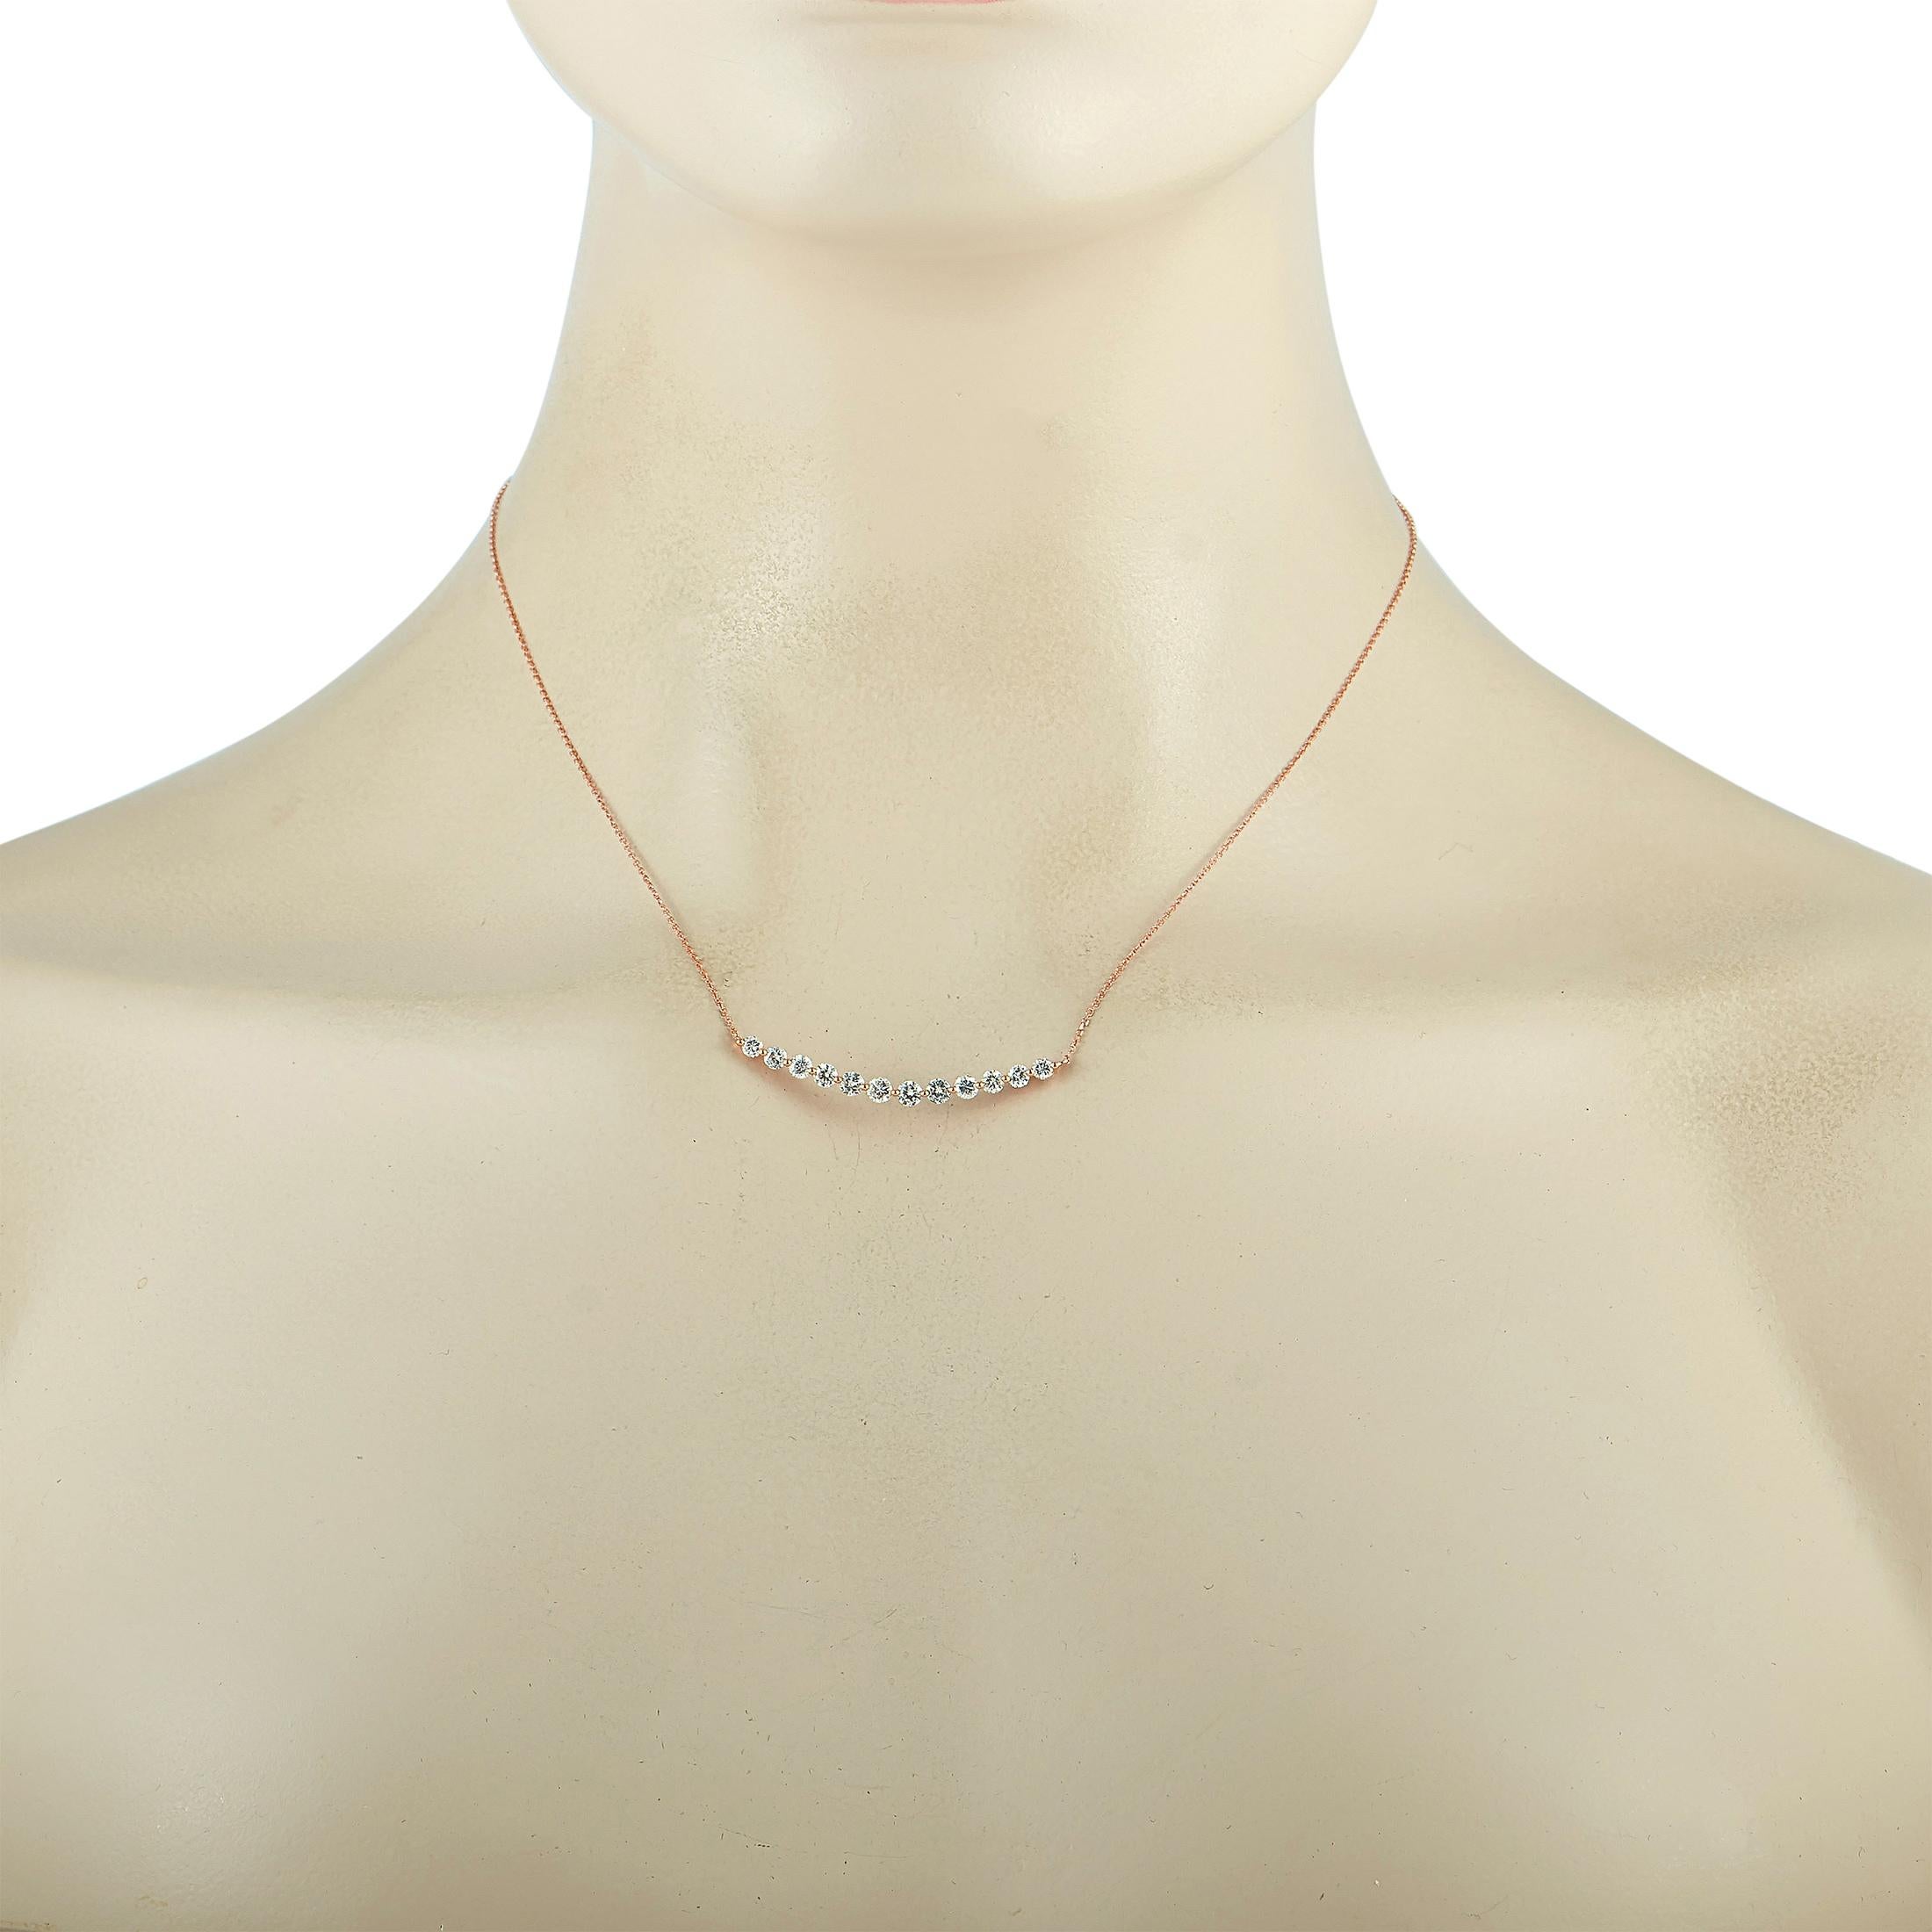 This LB Exclusive necklace is made of 18K rose gold and embellished with diamonds that amount to 1.30 carats. The necklace weighs 2.9 grams and boasts a 15” chain and a pendant that measures 0.12” in length and 1.62” in width.
 
 Offered in brand